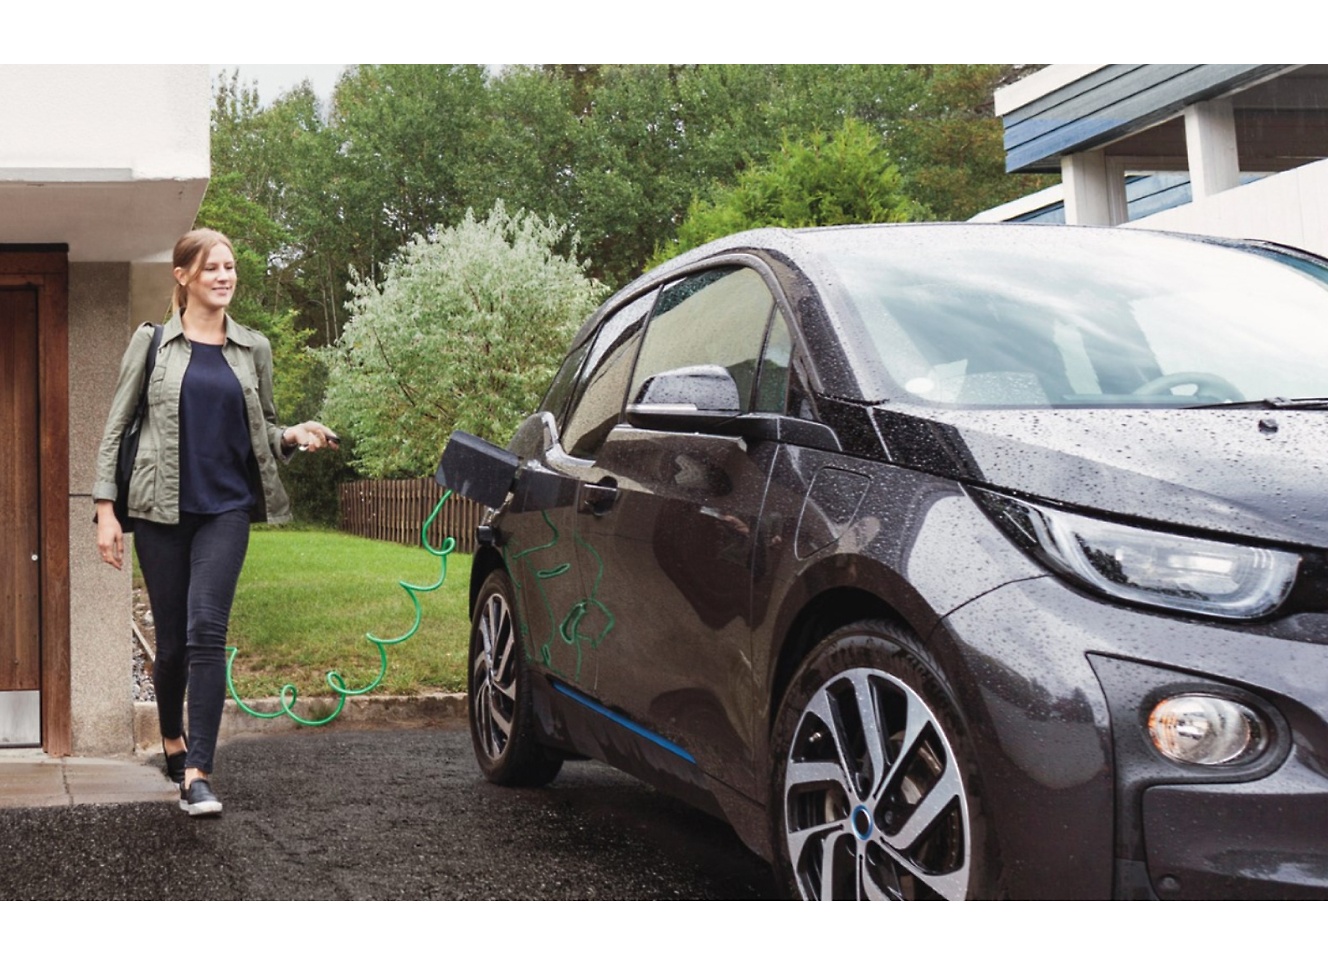 A woman is charging her BMW i3 in front of a house.